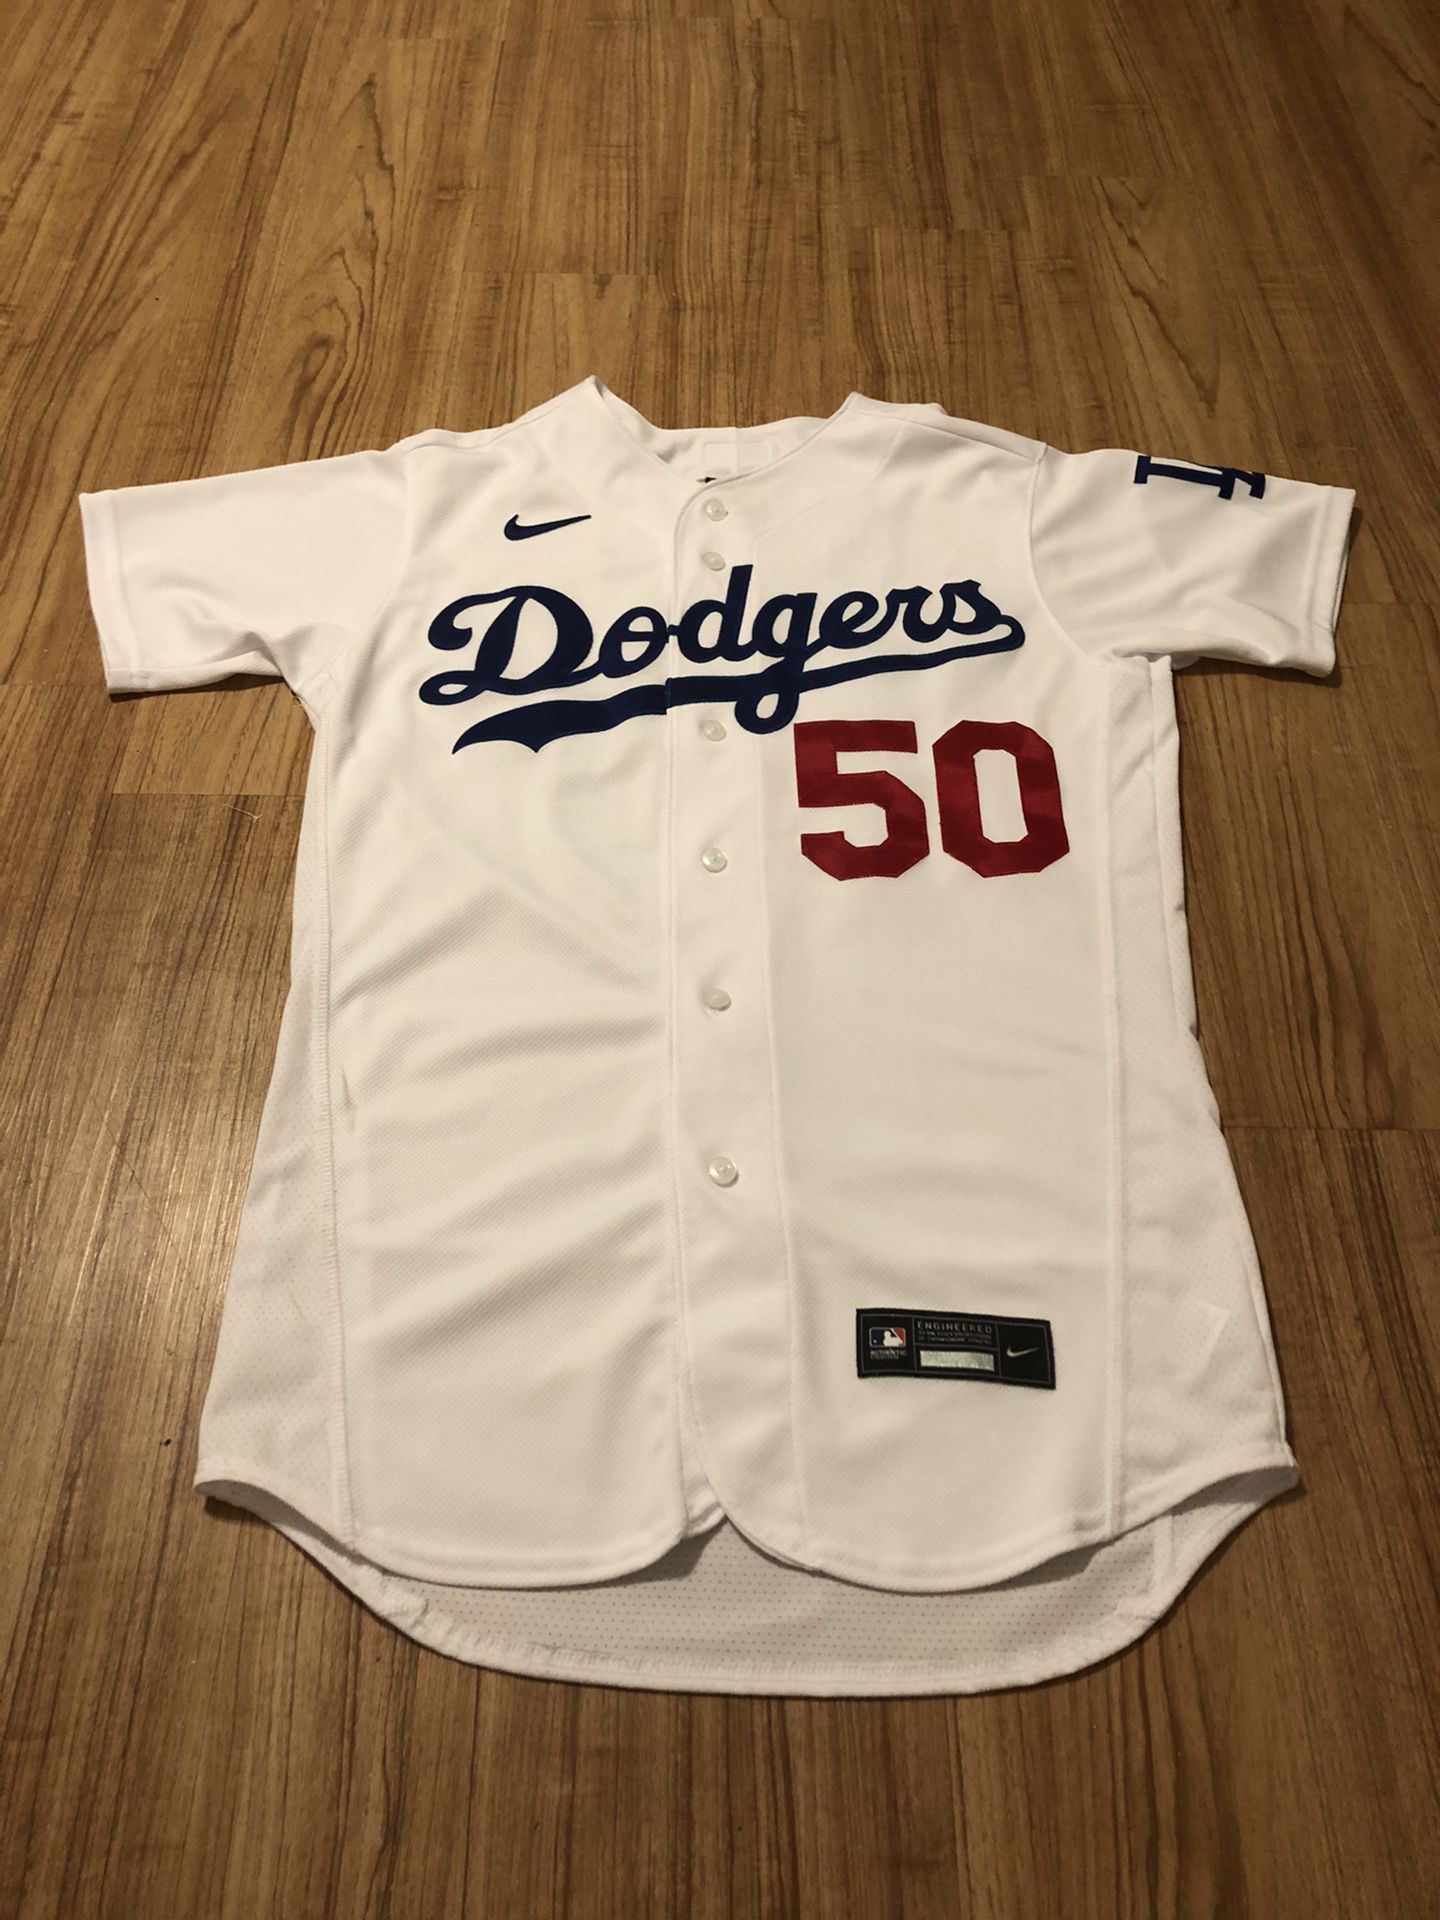 Los Angeles Dodgers Nike Mookie Betts #50 Jersey (Alternate Blue) XL Men's  (% Authentic) New With Out Tags!!! for Sale in Artesia, CA - OfferUp